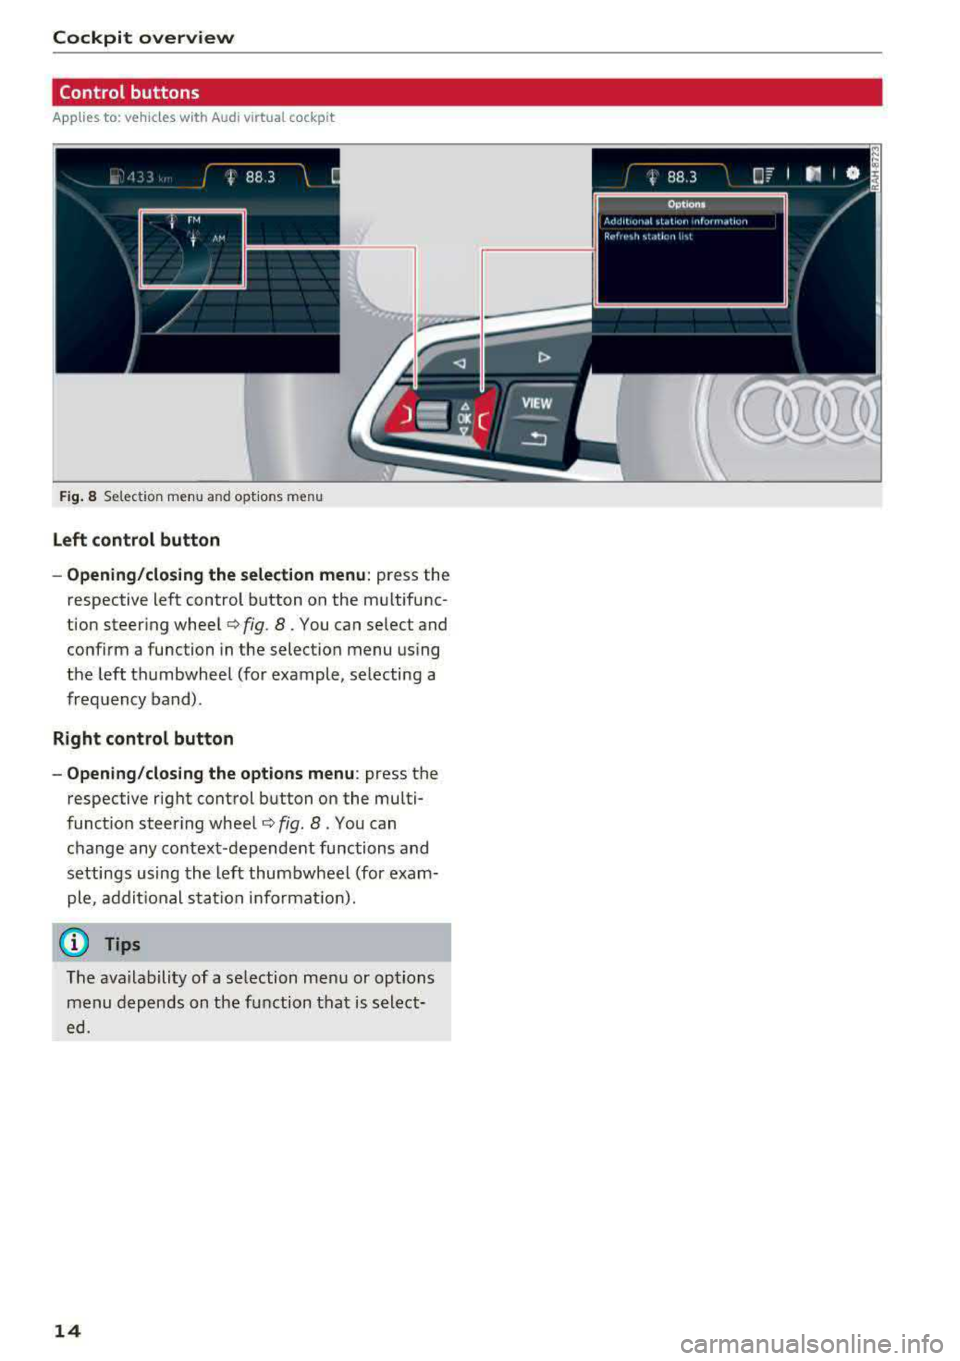 AUDI A3 SEDAN 2017 User Guide Cockpit  overview 
Control  buttons 
Applies  to: vehicles with  Audi virtual  cockpit 
I rM 
 t M ... 
F ig . 8 Se lect ion  menu  and optio ns  m en u 
Left  control  button 
- Opening/closing the